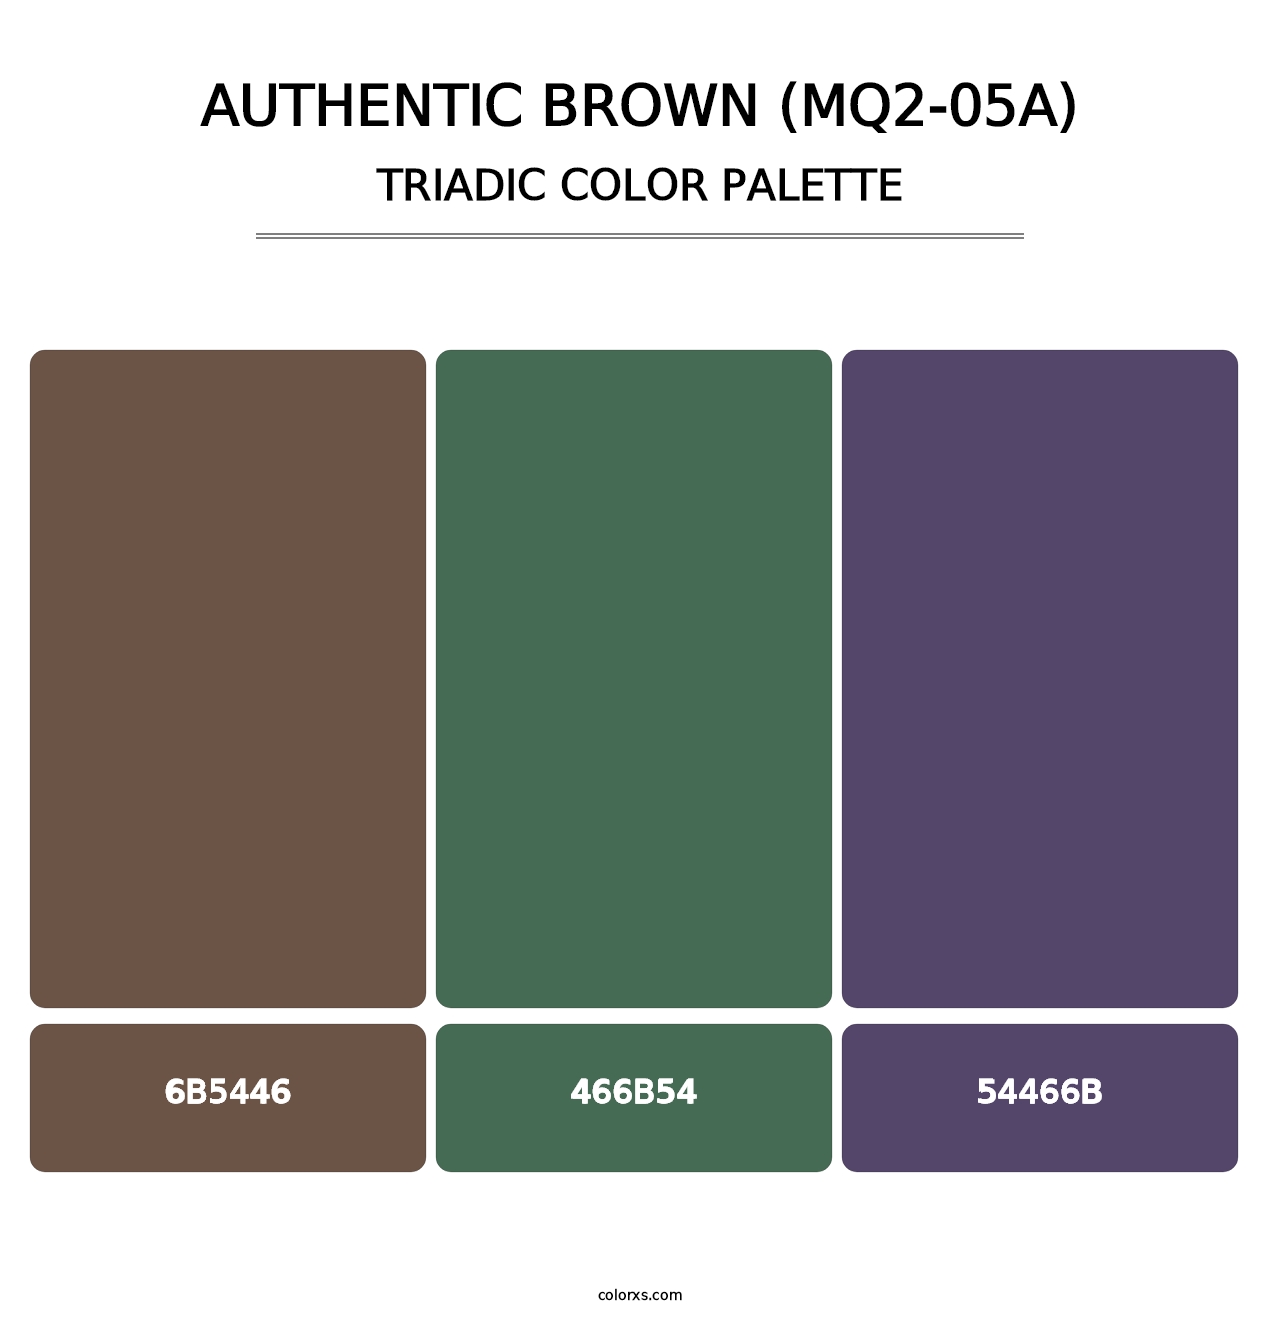 Authentic Brown (MQ2-05A) - Triadic Color Palette